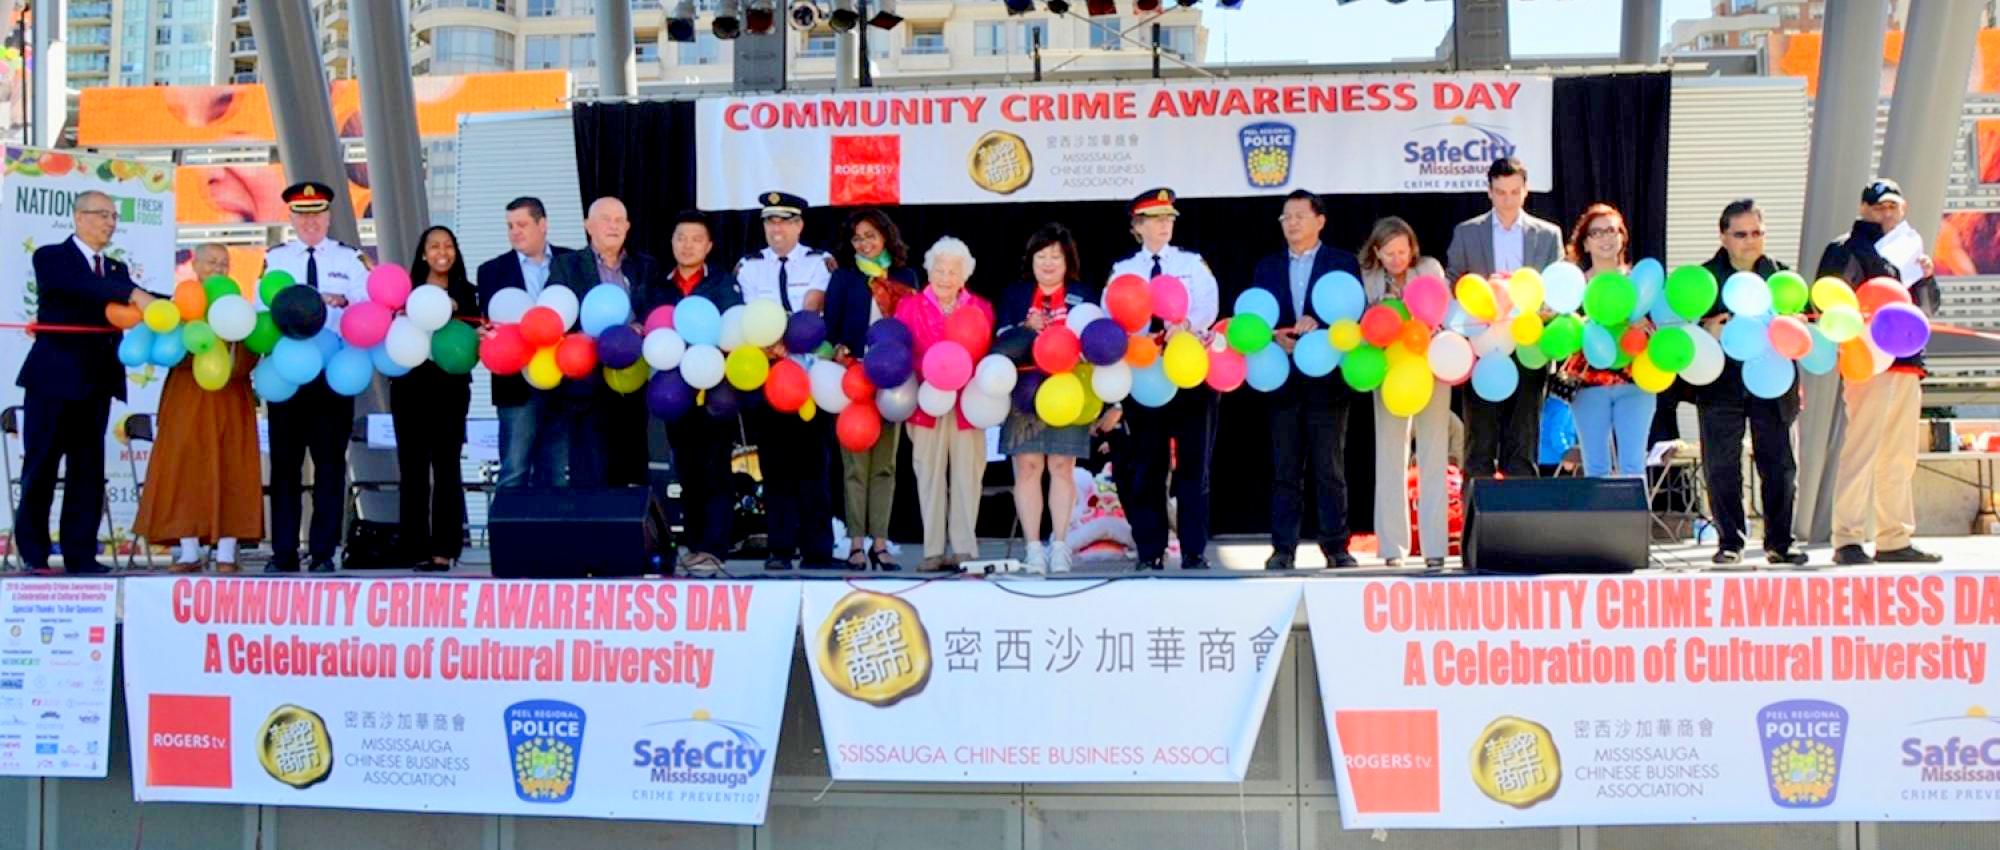 Annual Community Crime Awareness Day 2017 photo source: 
https://culture.mississauga.ca/event/celebration-square/community-crime-awareness-day-%E2%80%93-celebration-cultural-diversity-0